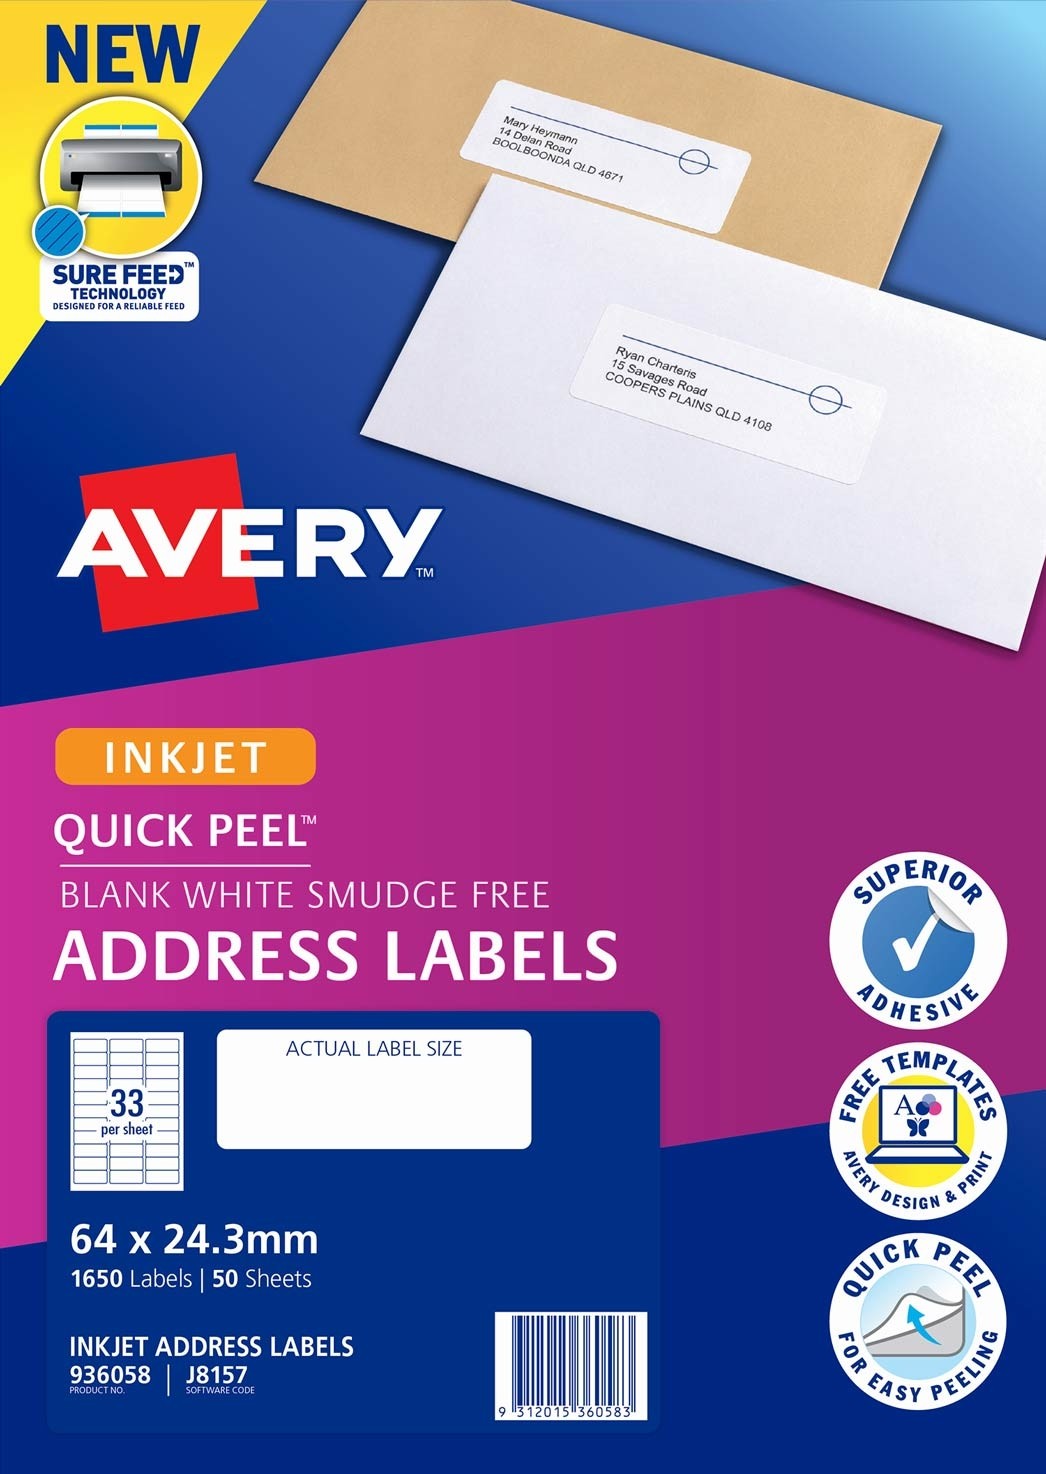 avery address labels free download software